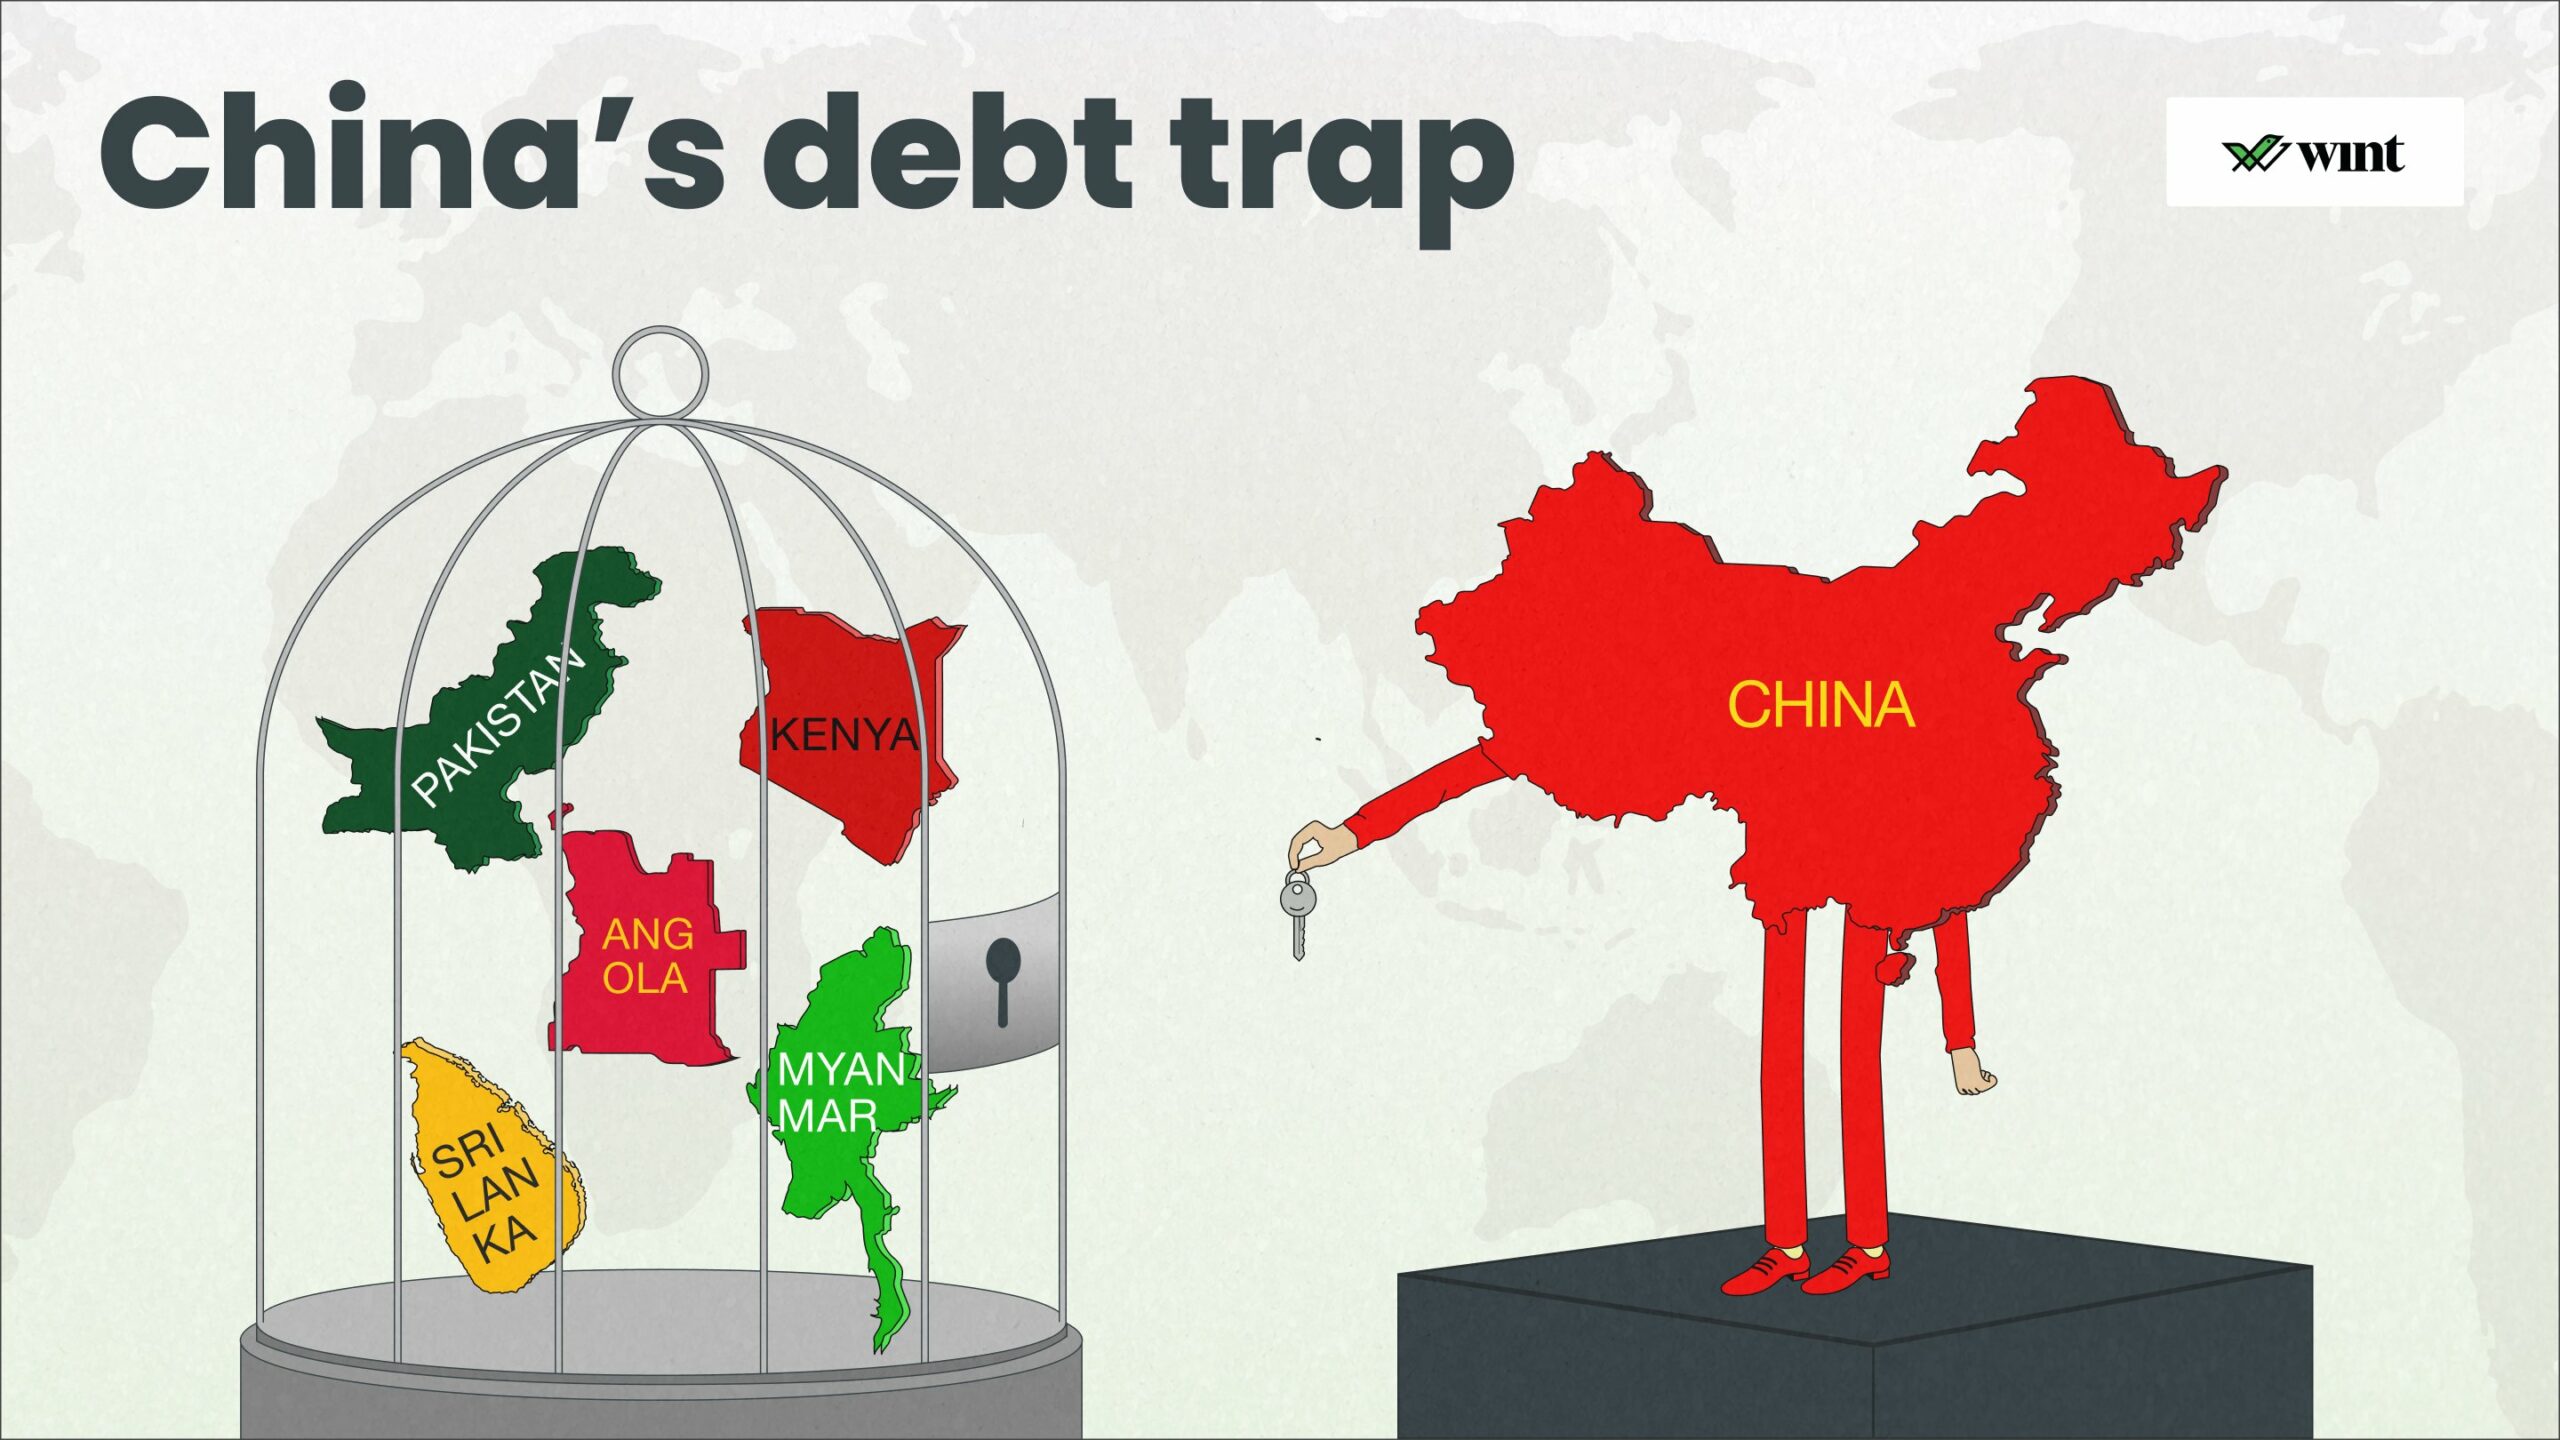 China’s Debt Trap: A Critical Analysis of President Muizzu’s Role